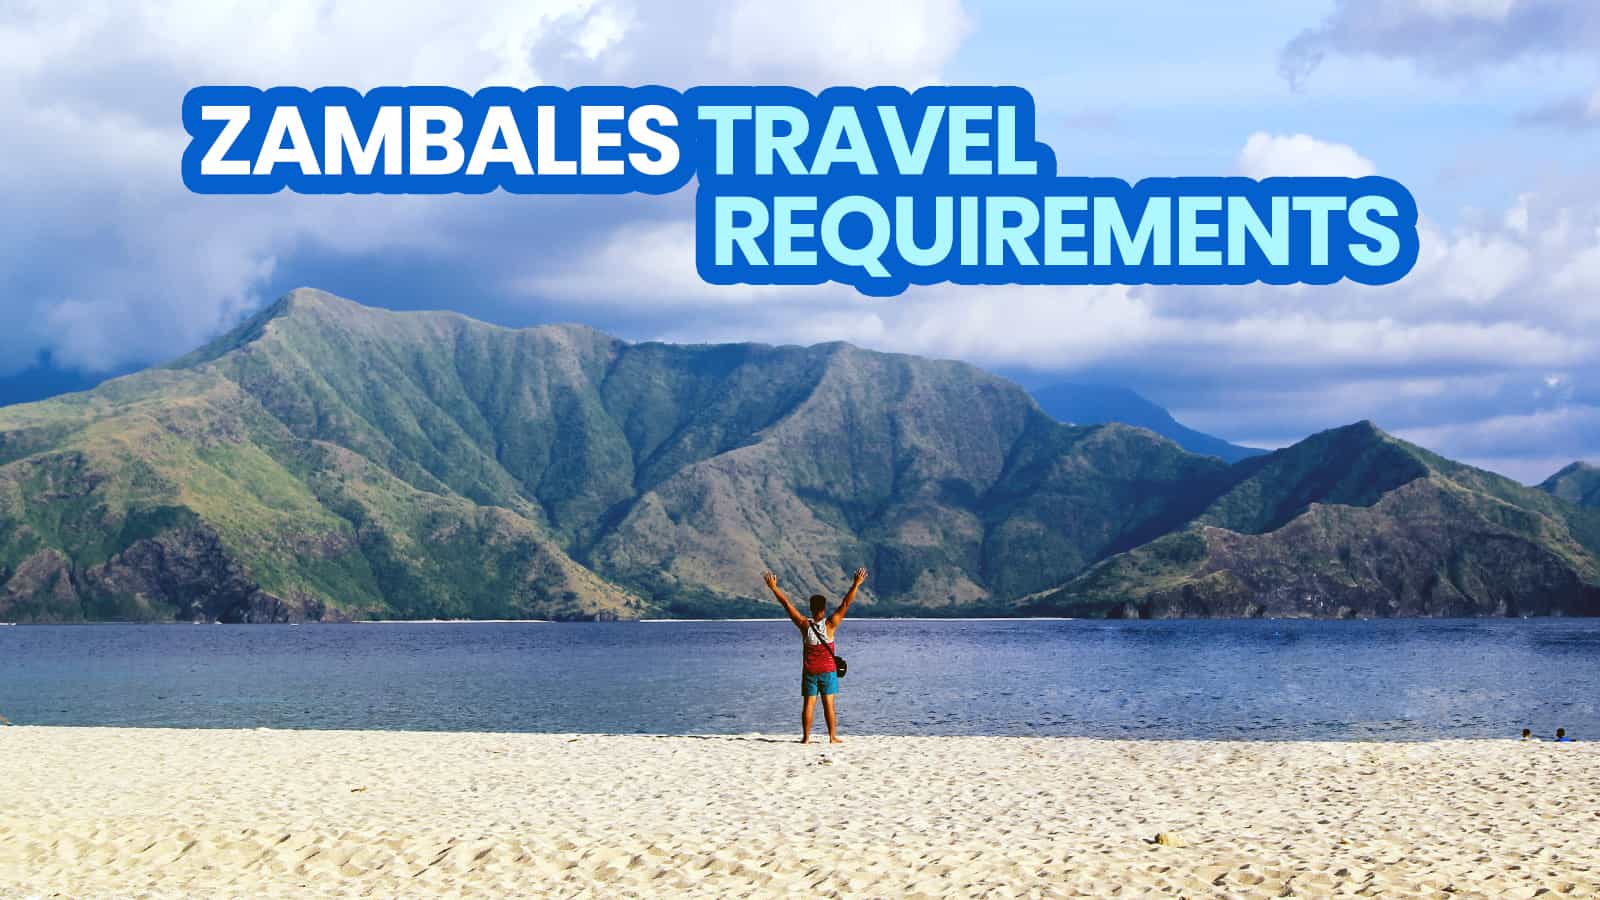 ZAMBALES TRAVEL REQUIREMENTS + Visita Step-by-Step Guide